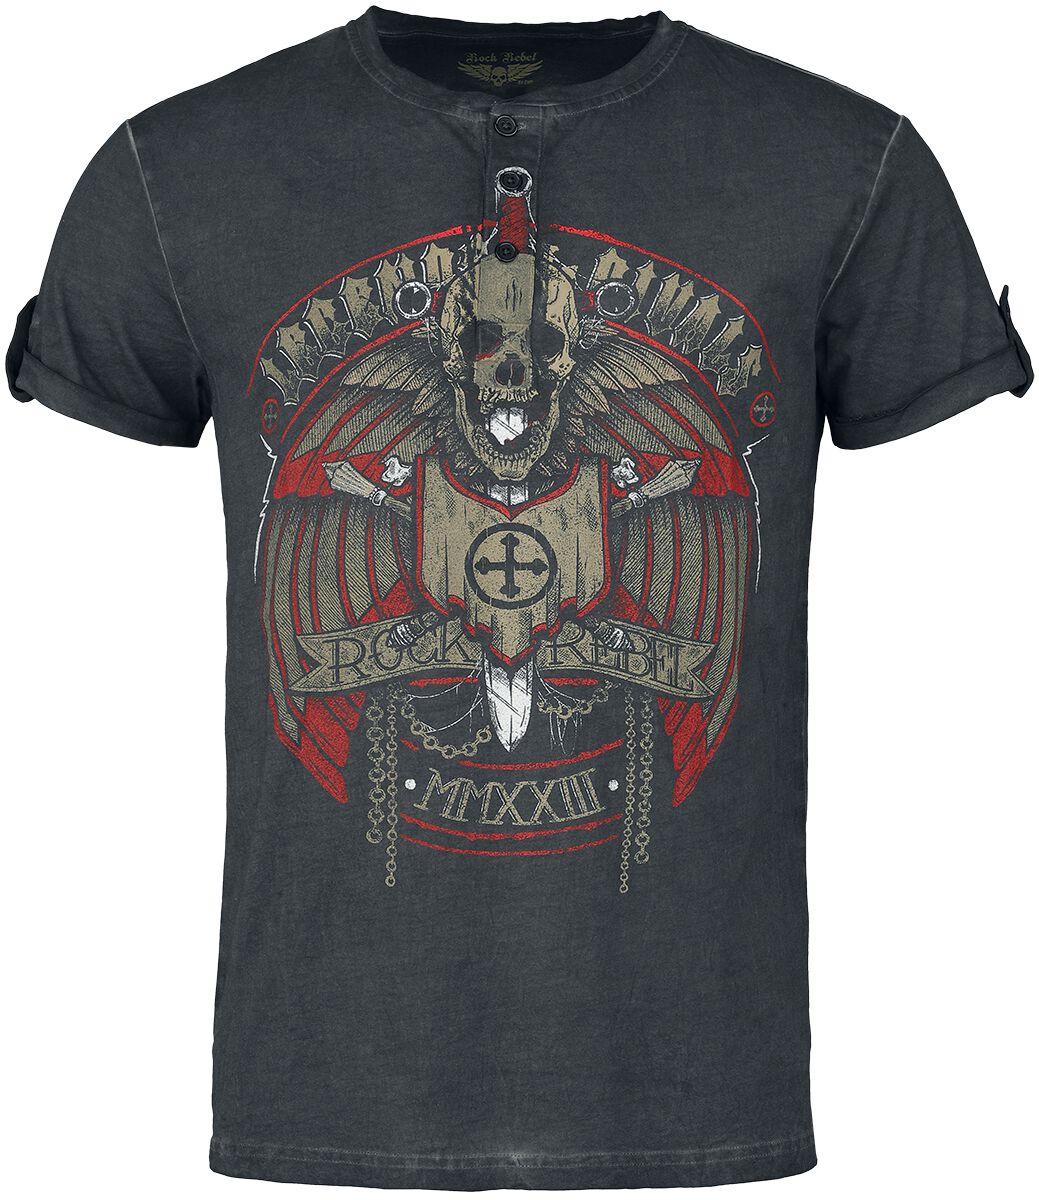 Image of T-Shirt di Rock Rebel by EMP - Vintage-style t-shirt - M a L - Uomo - grigio